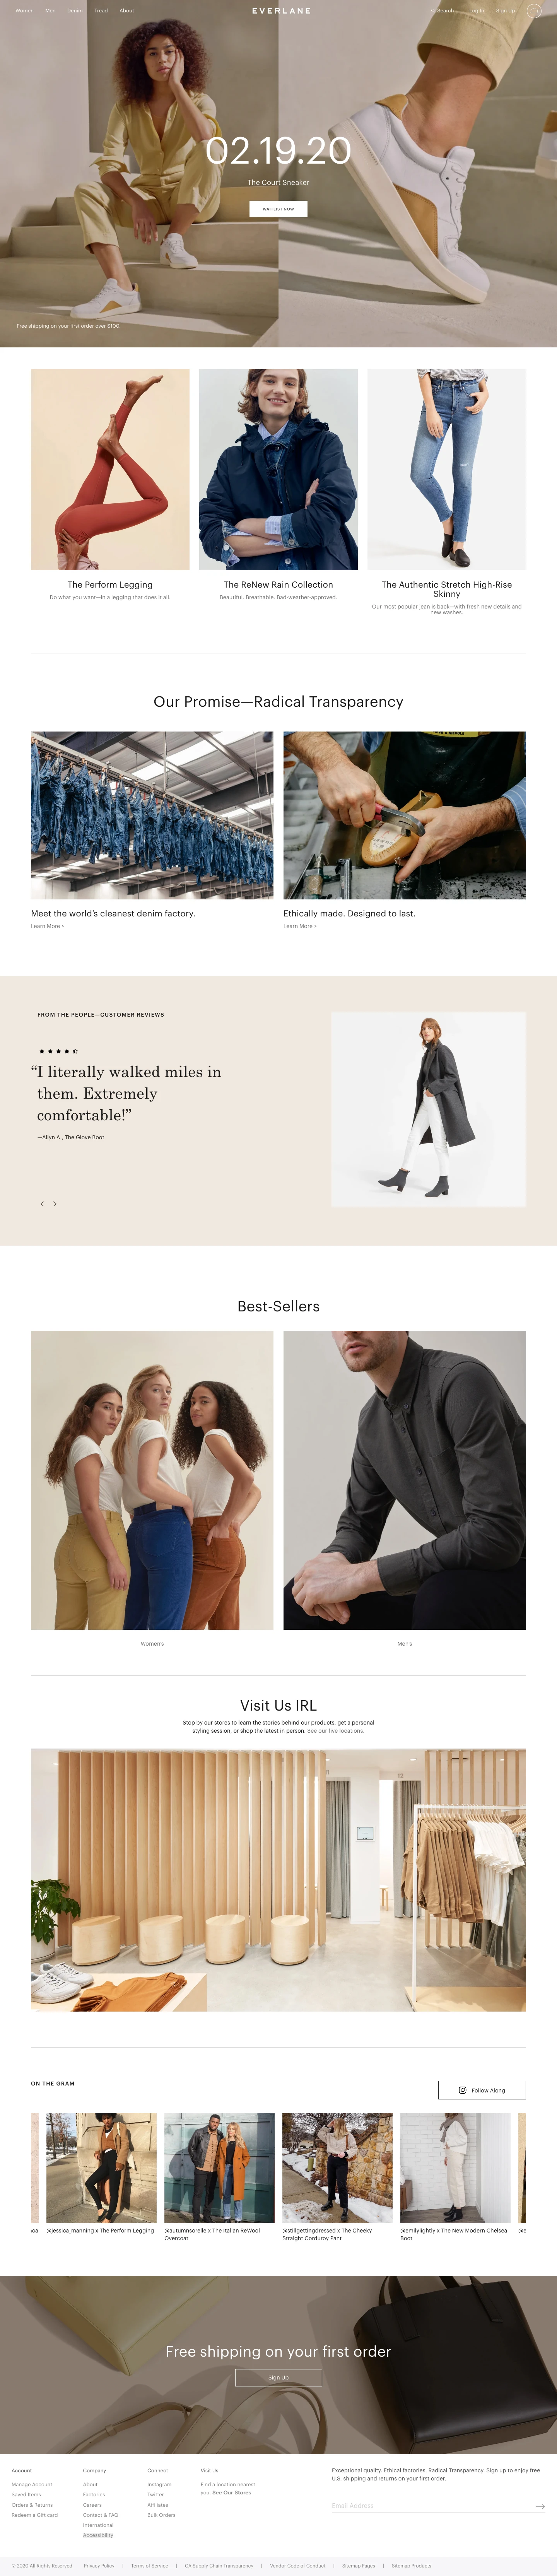 Everlane Landing Page Example: Shop Everlane now for modern essentials. We make the most beautiful essentials, at the best factories, without traditional markups.